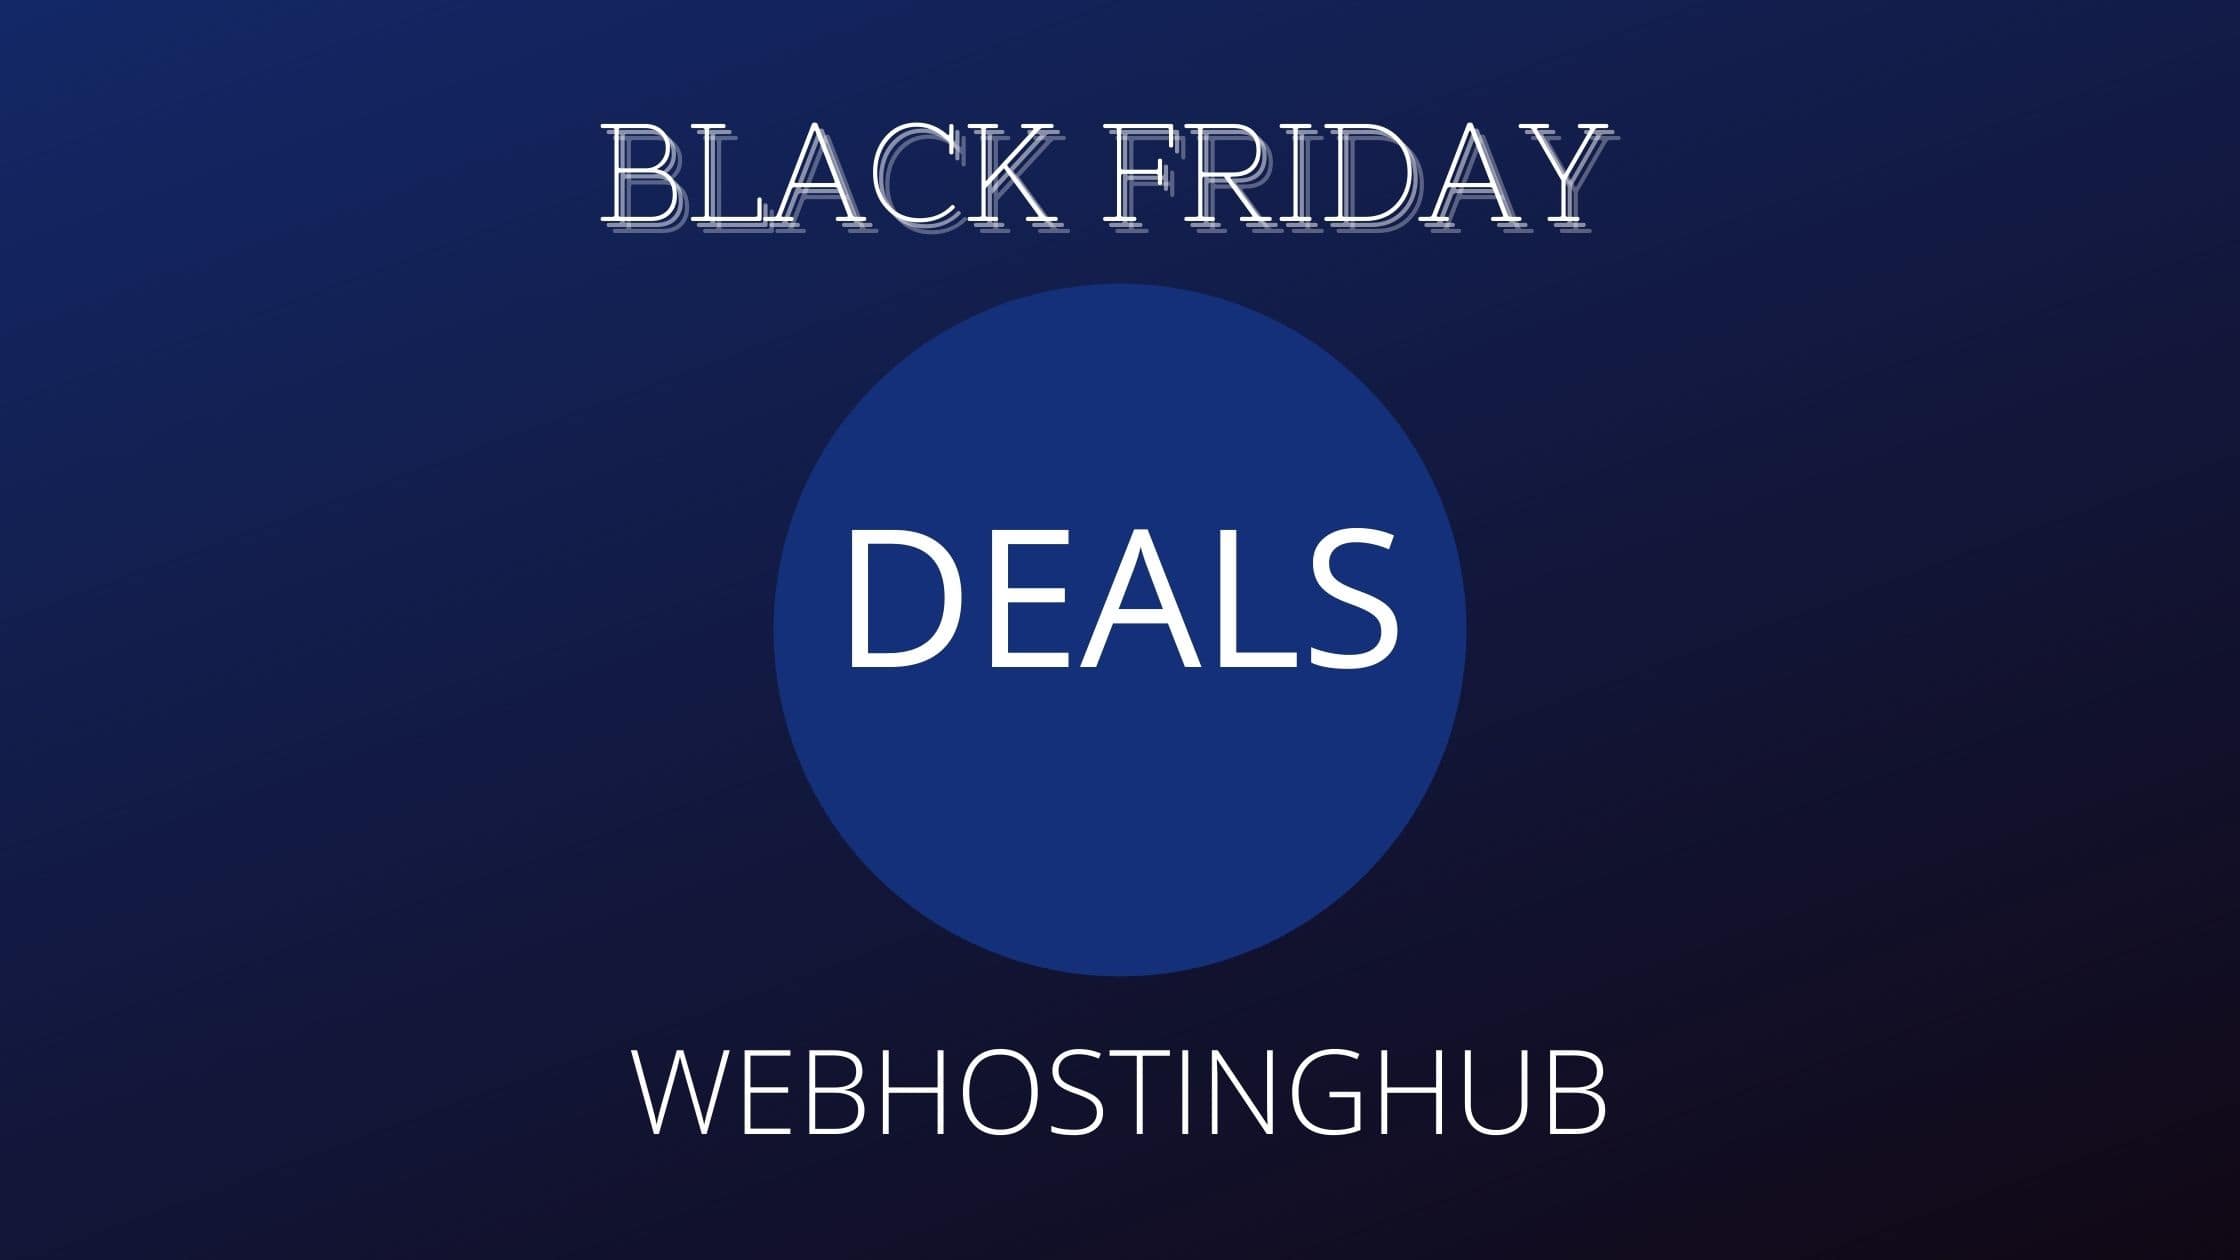 WEBHOSTINGHUB Black Friday Deals 2021-Exciting 44% OFF … Get it now!!! image